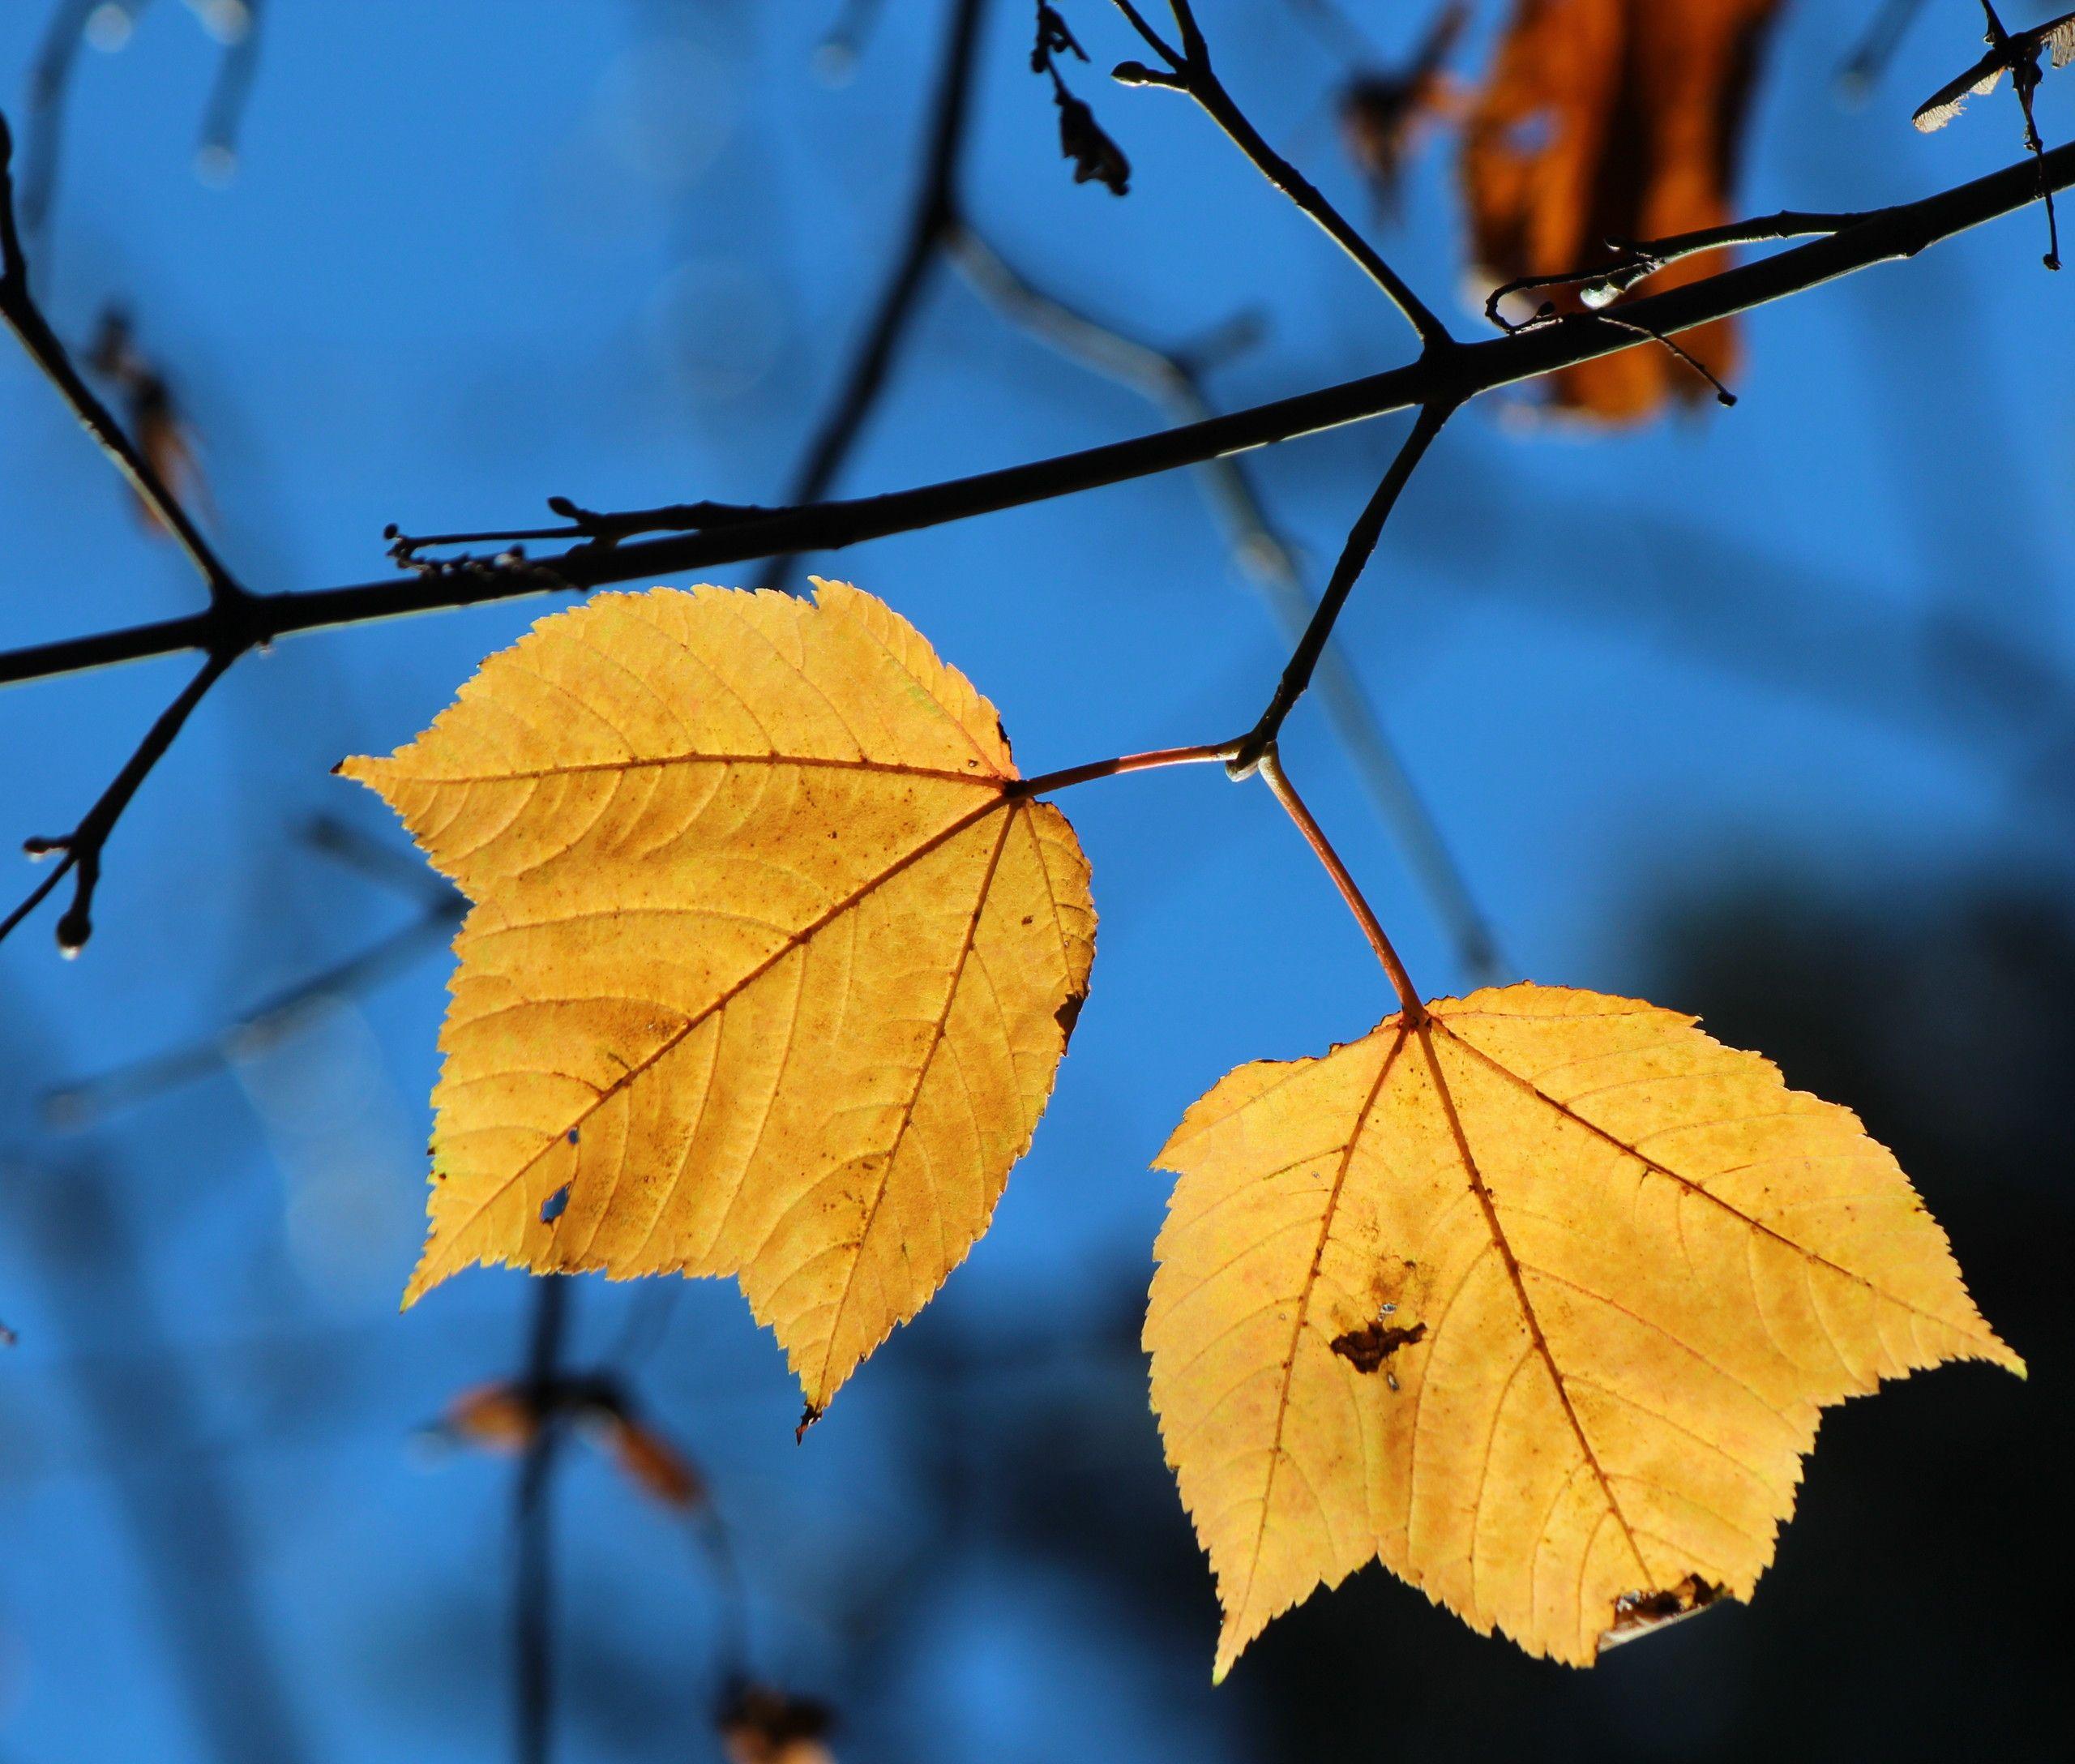 Blue Yellow Leaf Logo - File:Acer rufinerve yellow leaves.jpg - Wikimedia Commons